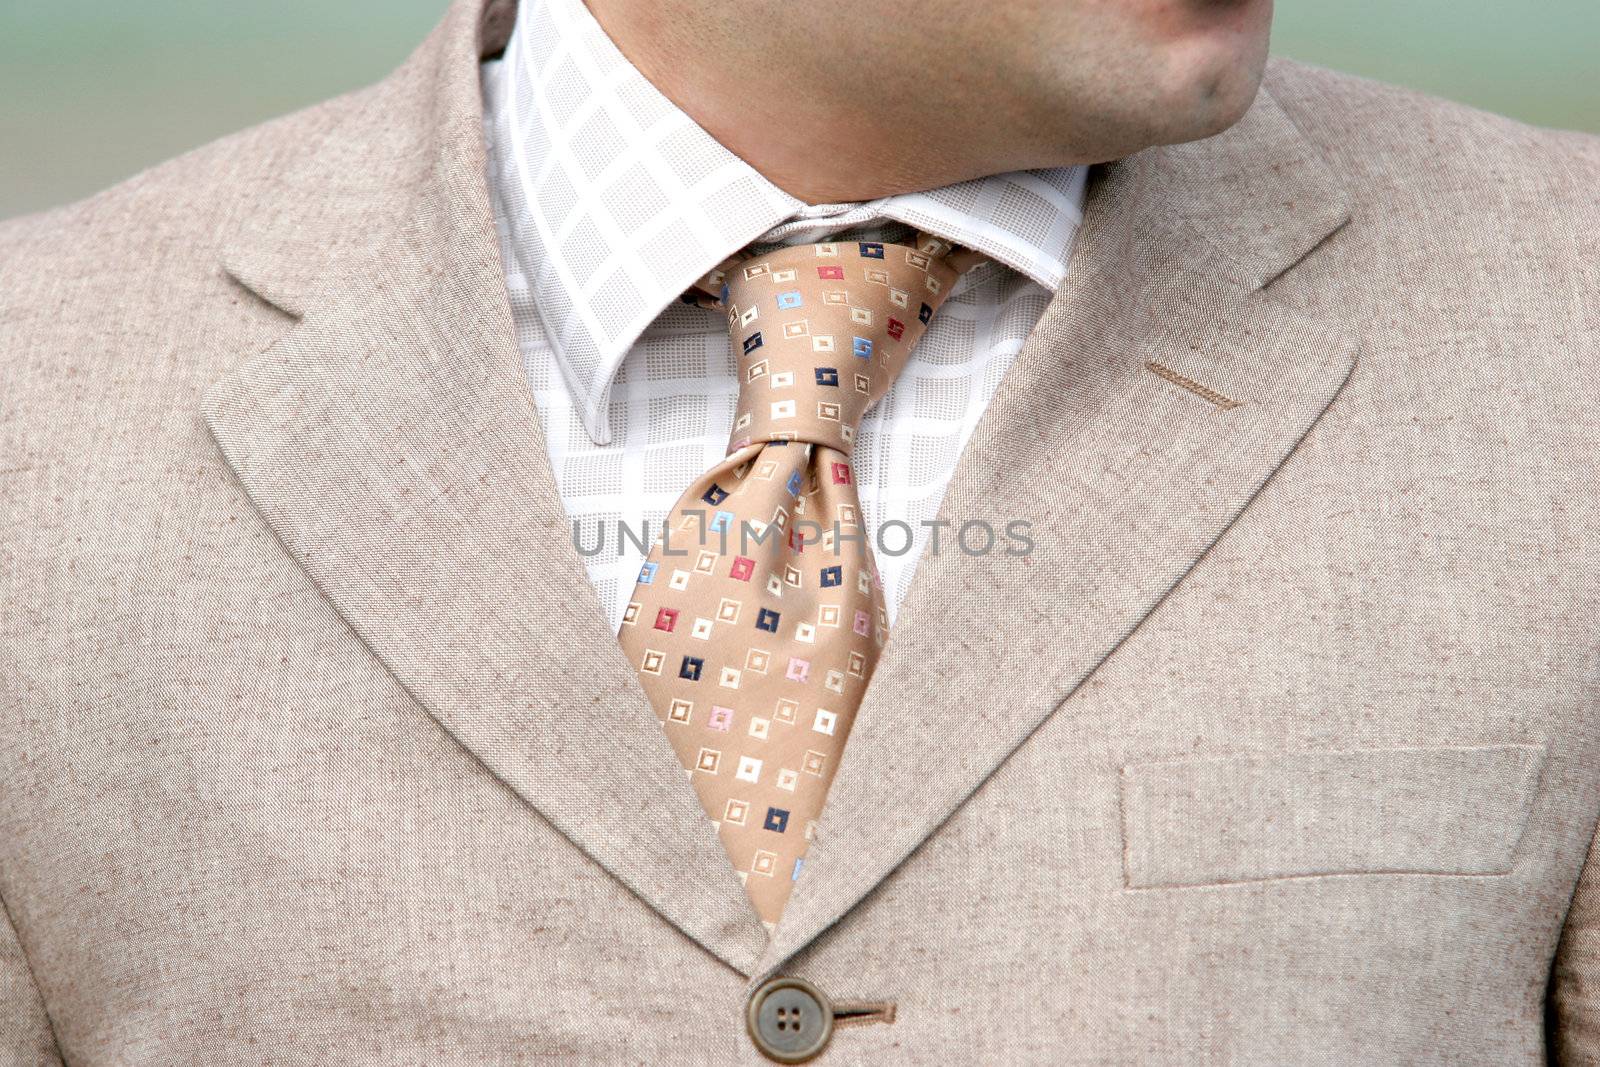 Closeup of a tie and shirt 